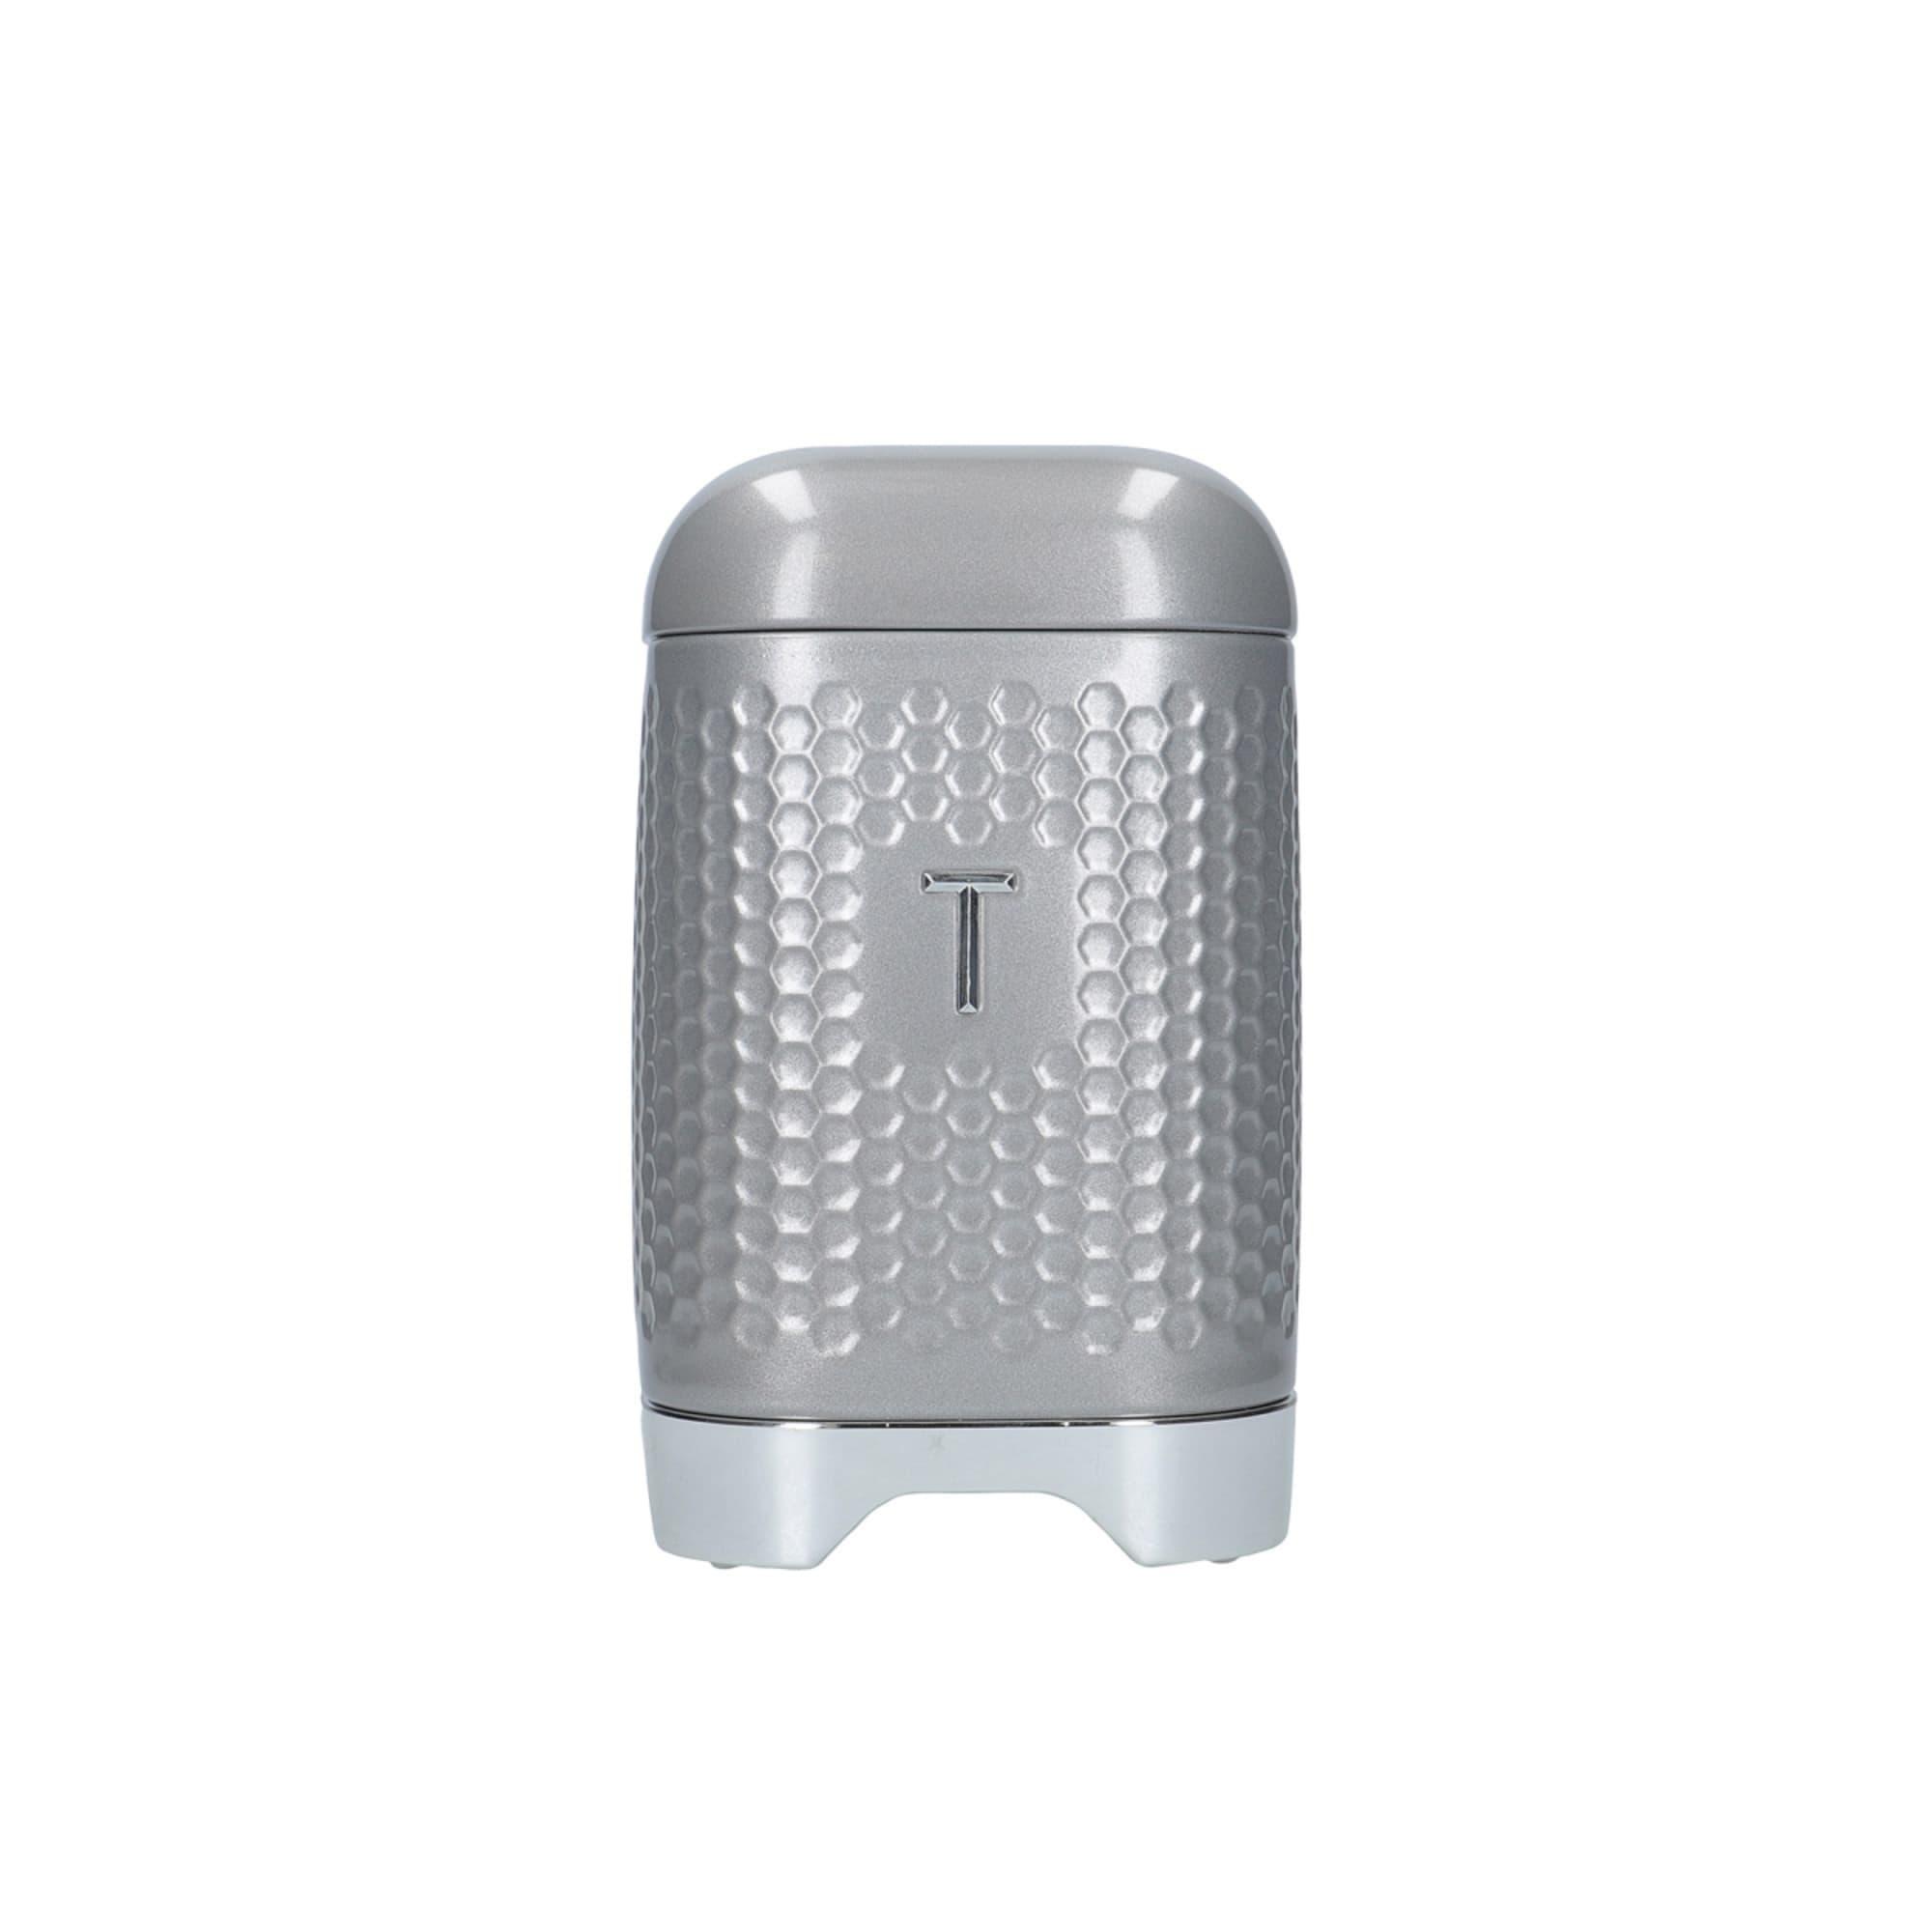 Kitchen Craft Lovello Canister Set of 3 Grey Image 5